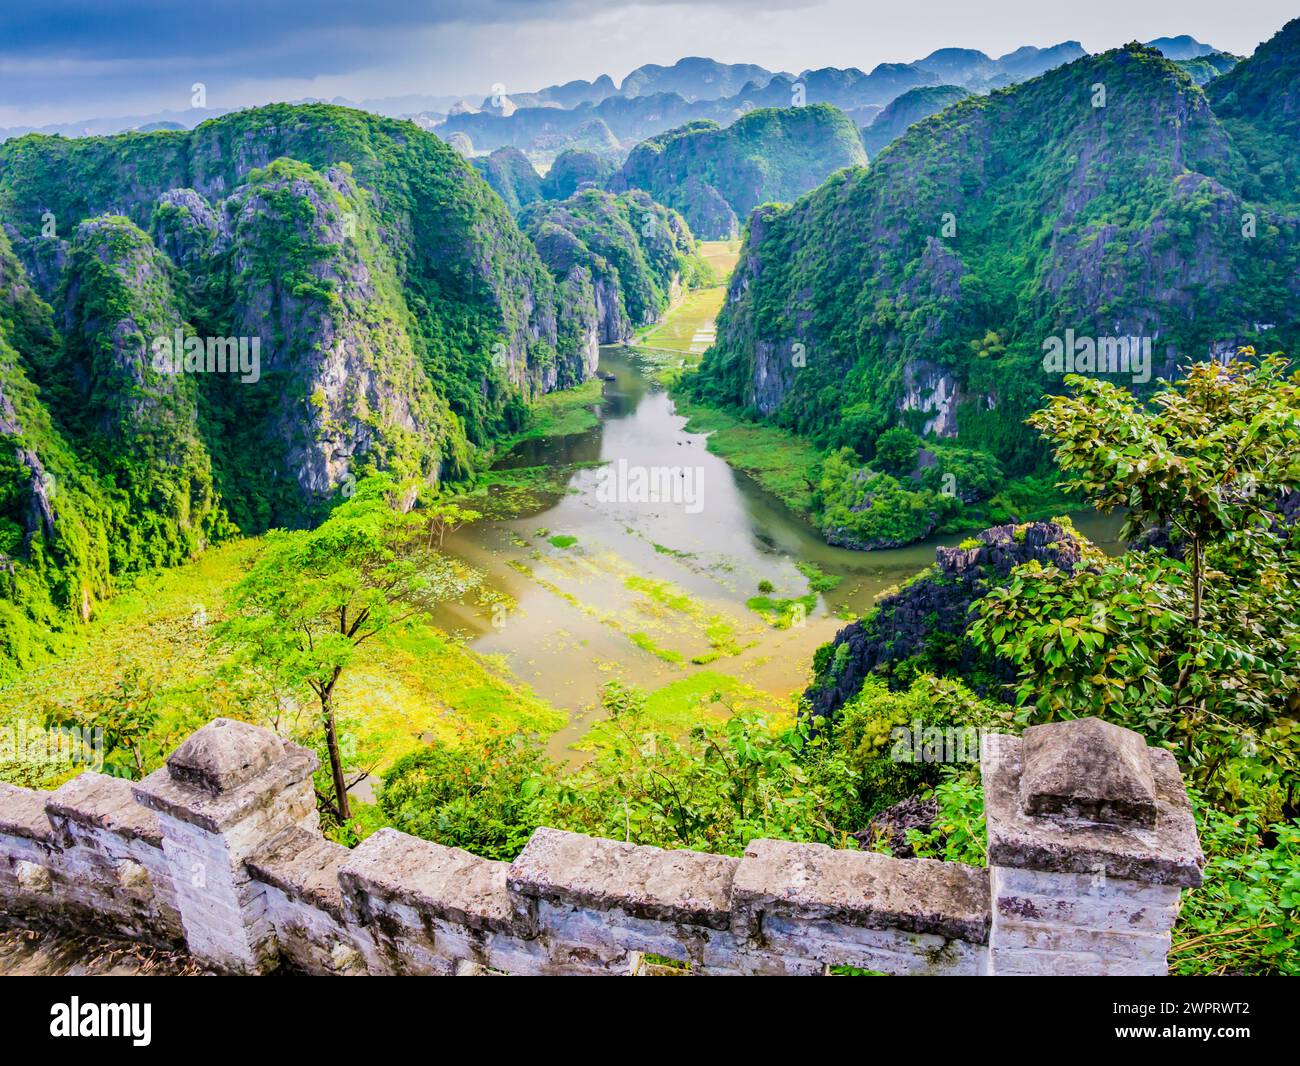 Impressive karst formations and rice paddy fields in Tam Coc with the stone staircase ascending the lying dragon in foreground, Ninh Binh province, Vi Stock Photo